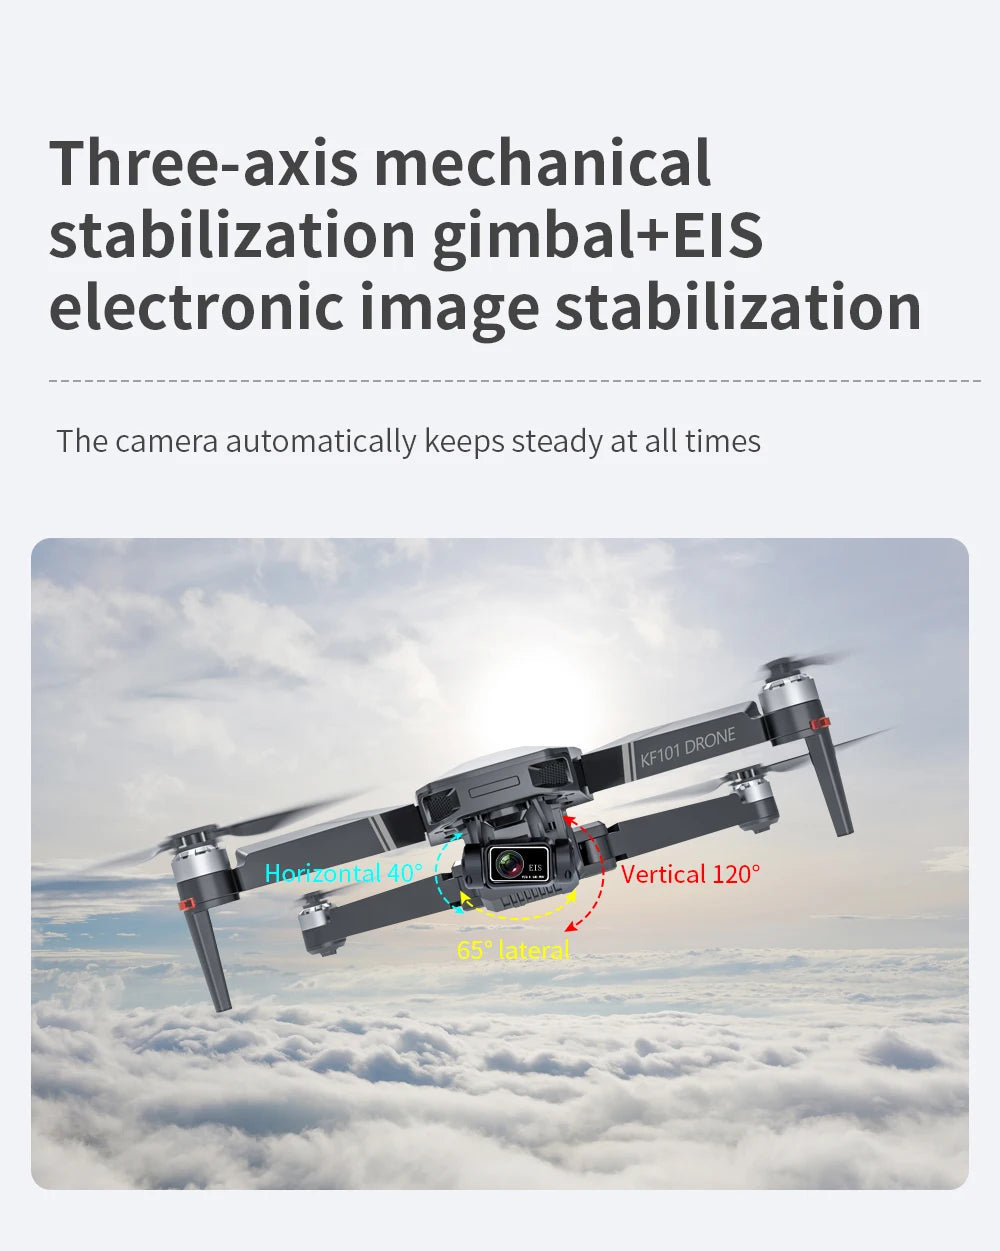 New GPS Drone, camera automatically keeps steady at all times Horizontal 40 Vertical 1208 650 /ate"